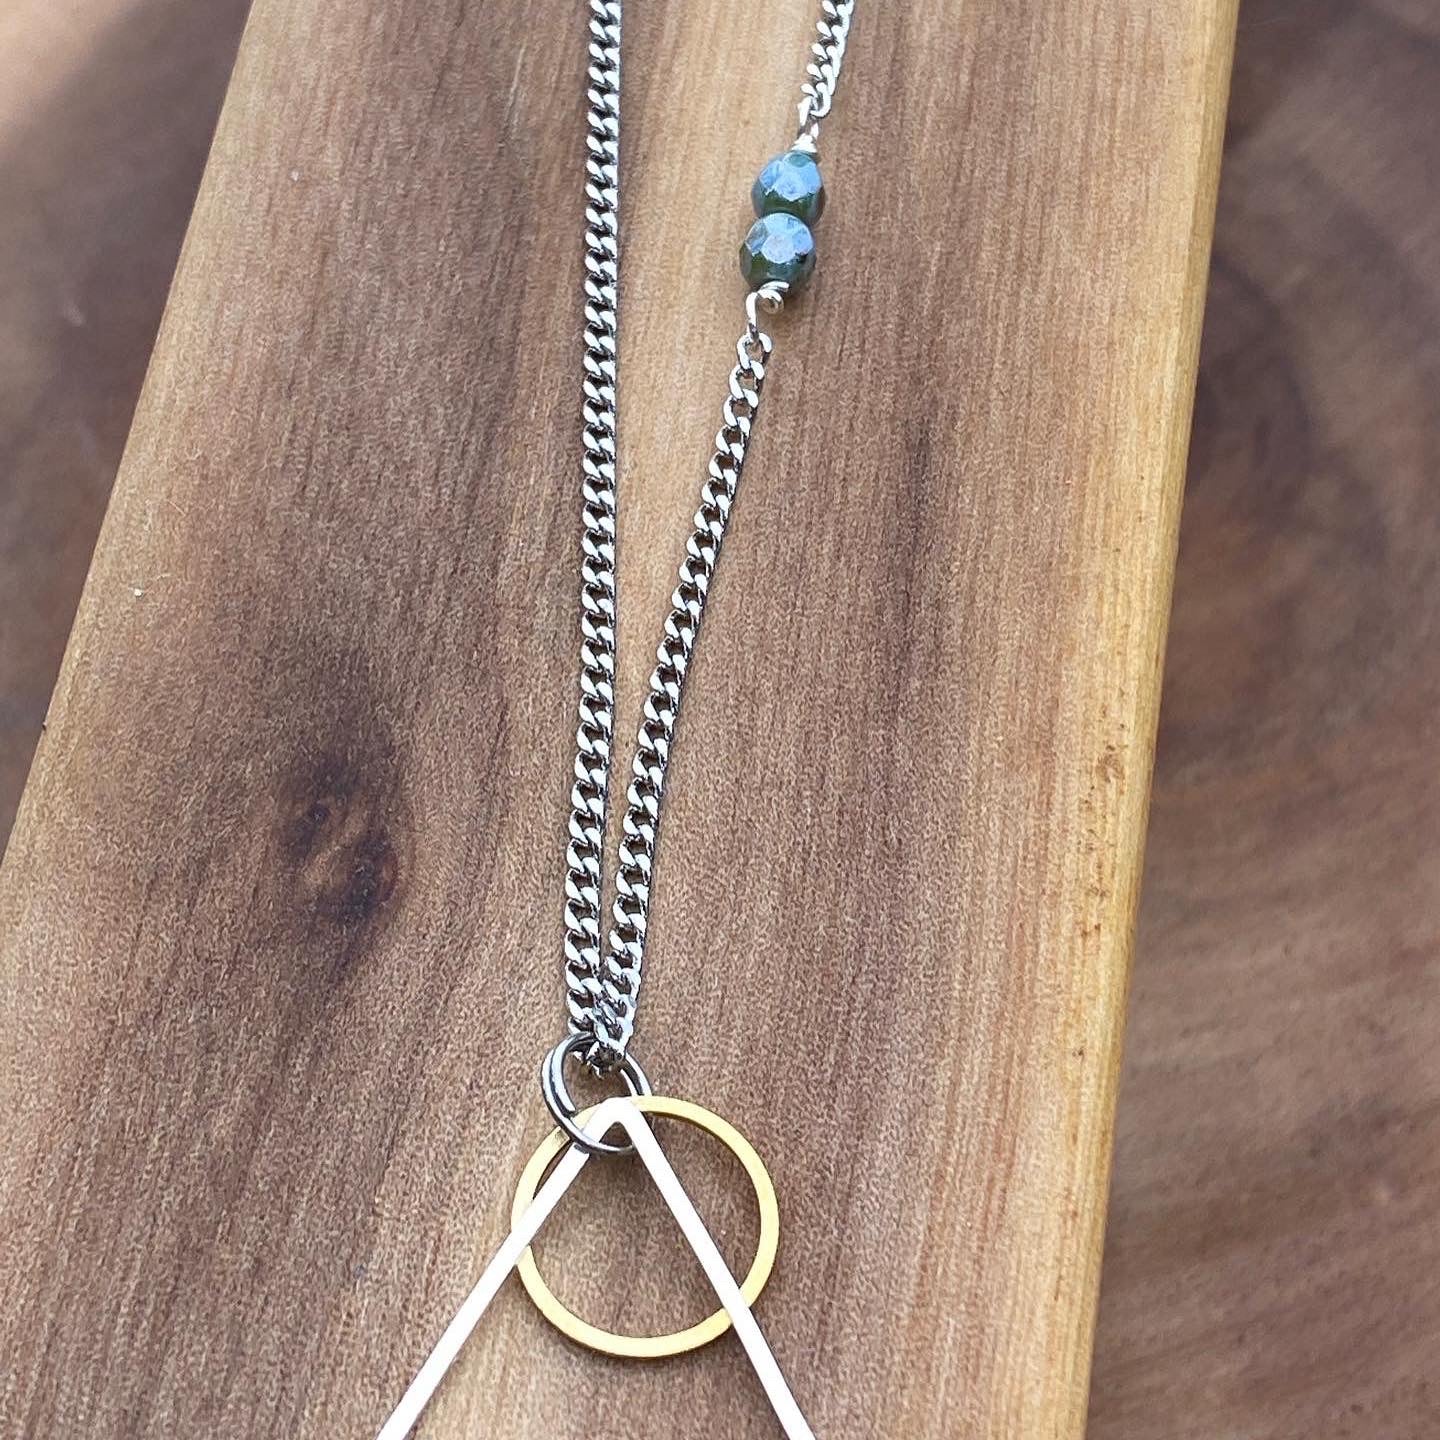 Necklace: Lariat length, Stacking Shapes with glass bead accent   SALE